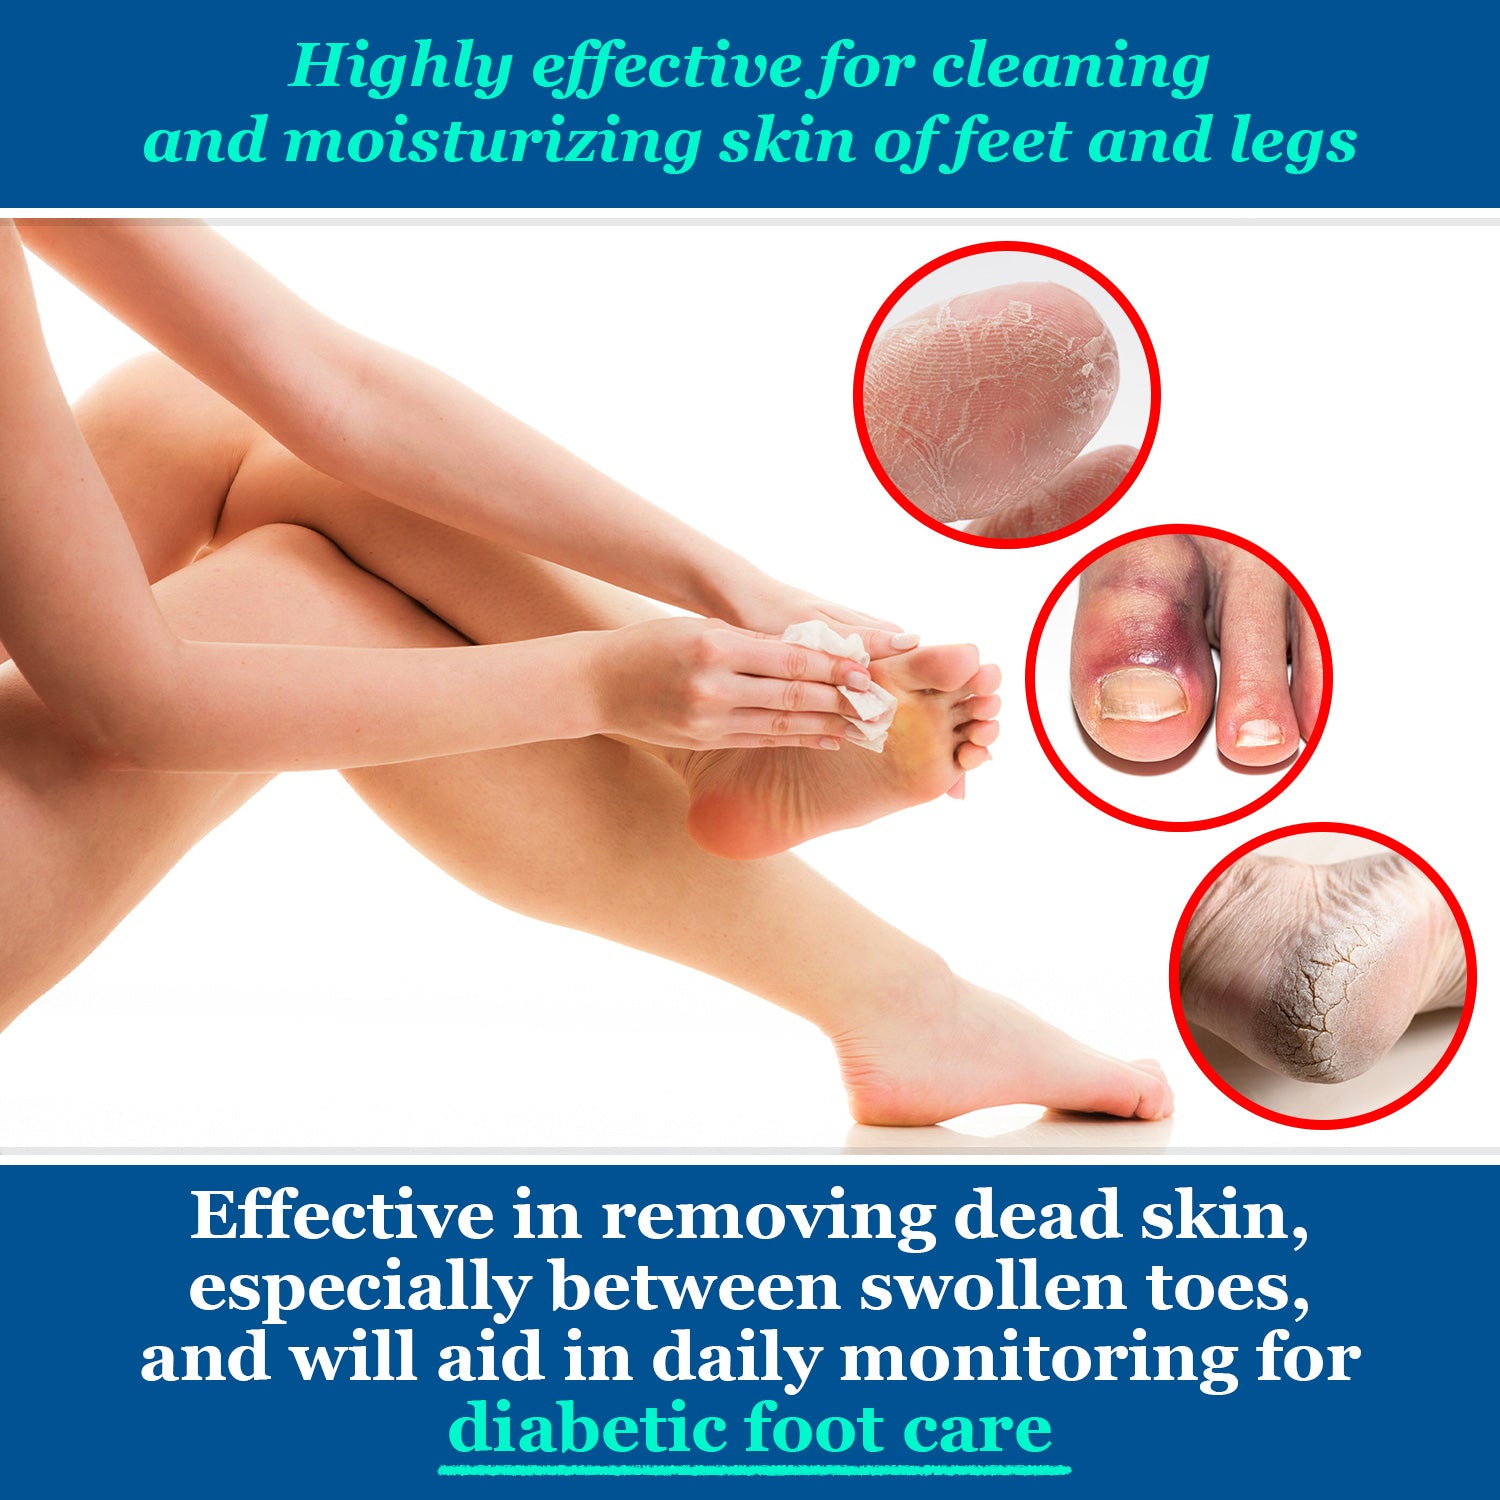 Highly effective for cleaning and moisturizing skin of feet and legs. Effective in removing dead skin, especially between swollen toes, and will aid in daily monitoring for diabetic foot care.